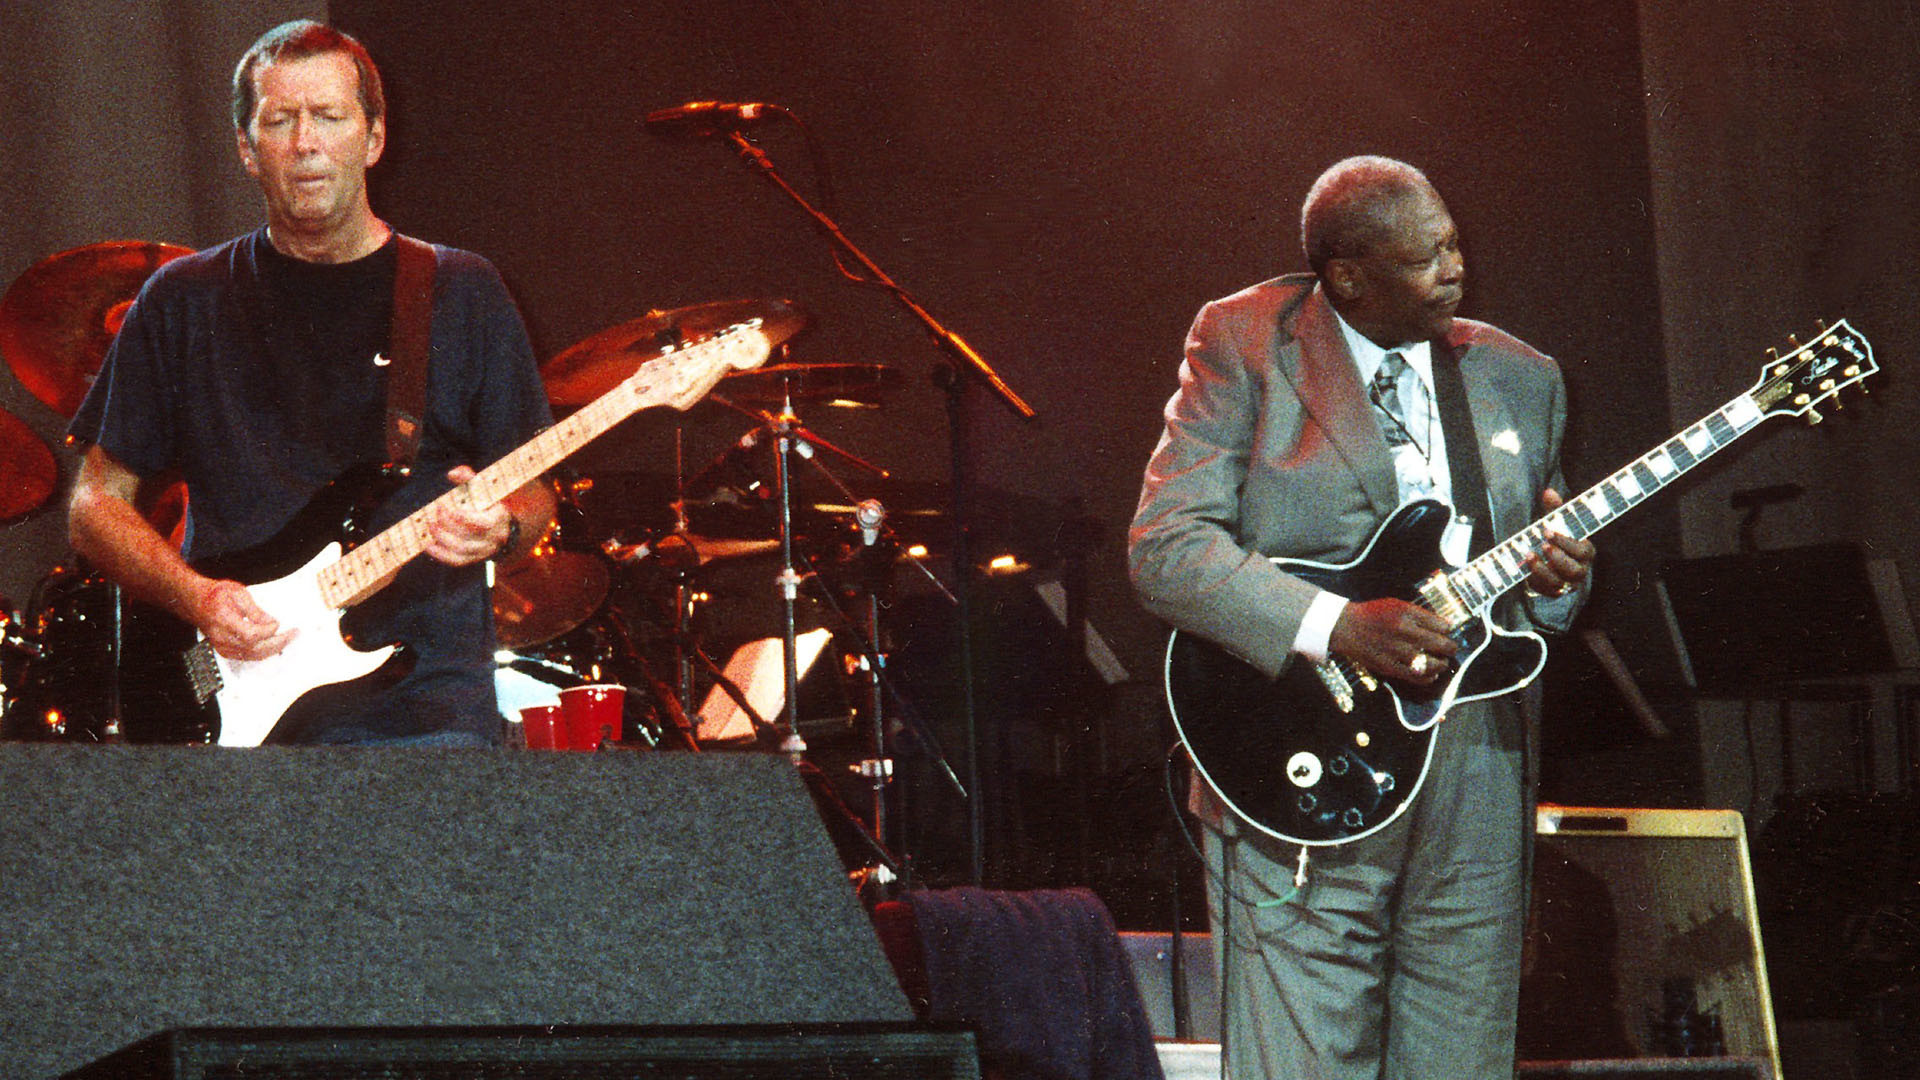 1920x1080 1 B.b. King & Eric Clapton HD Wallpapers | Backgrounds .